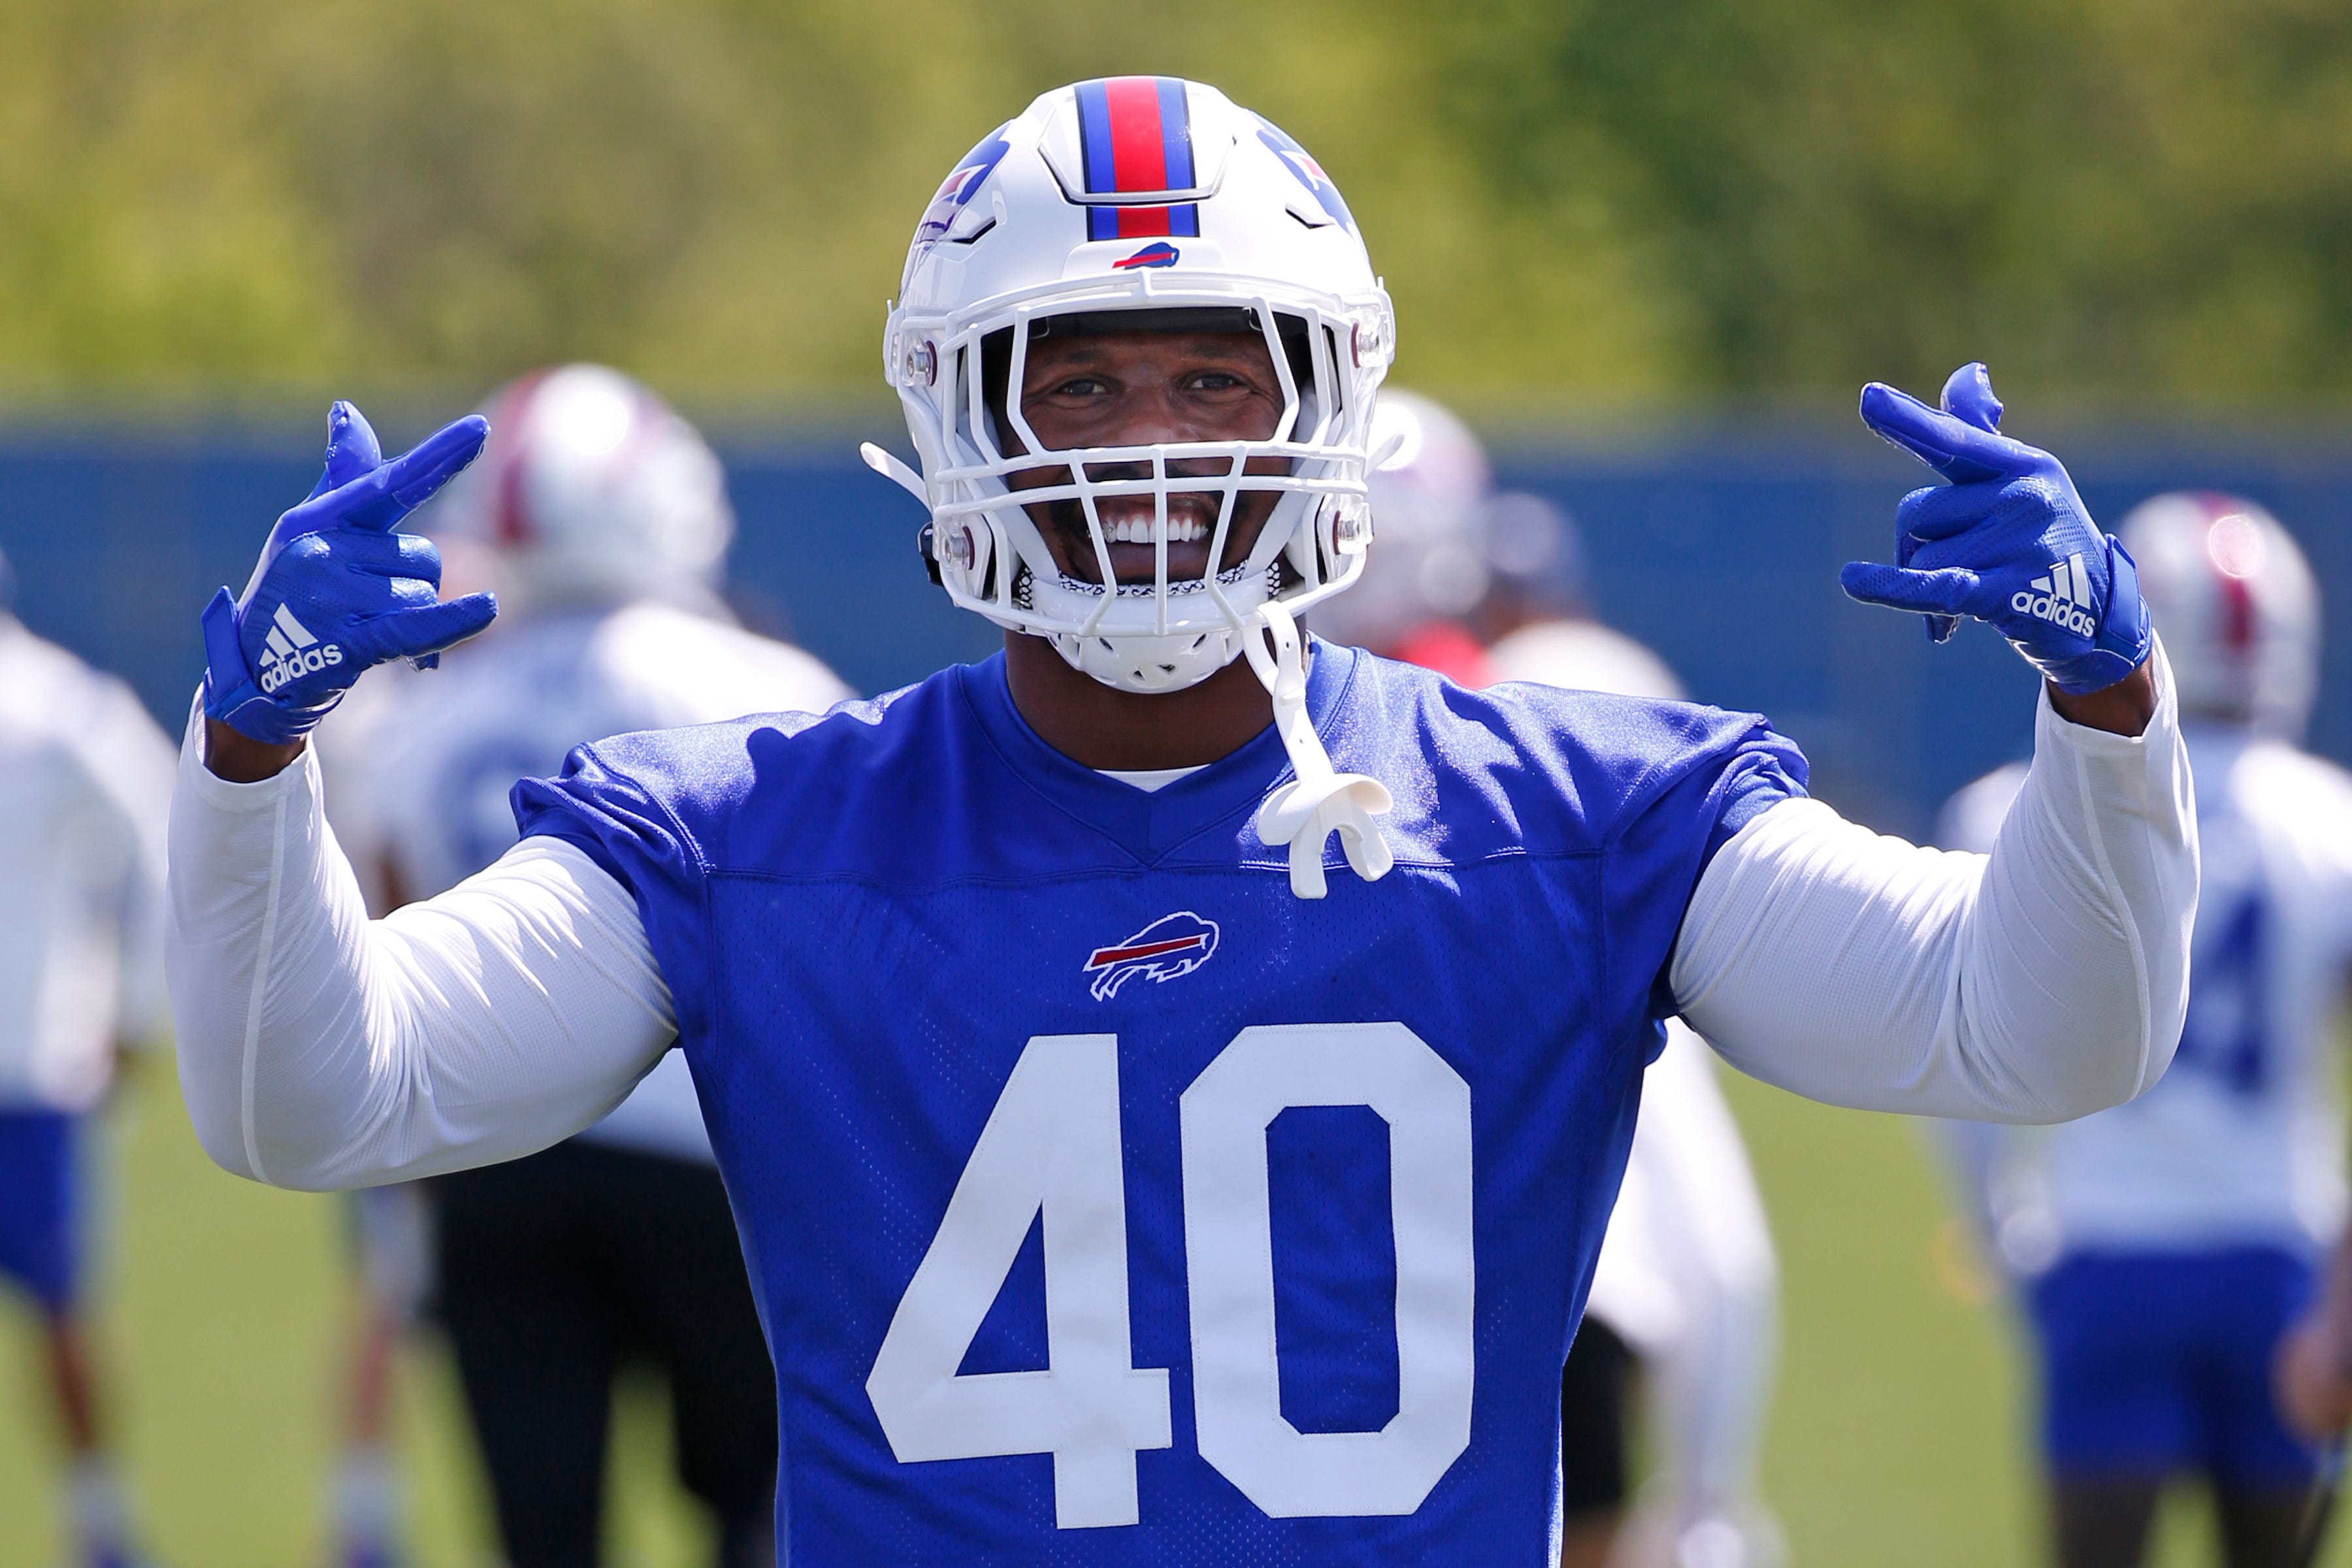 Von Miller poses for the camera during the Bills OTAs